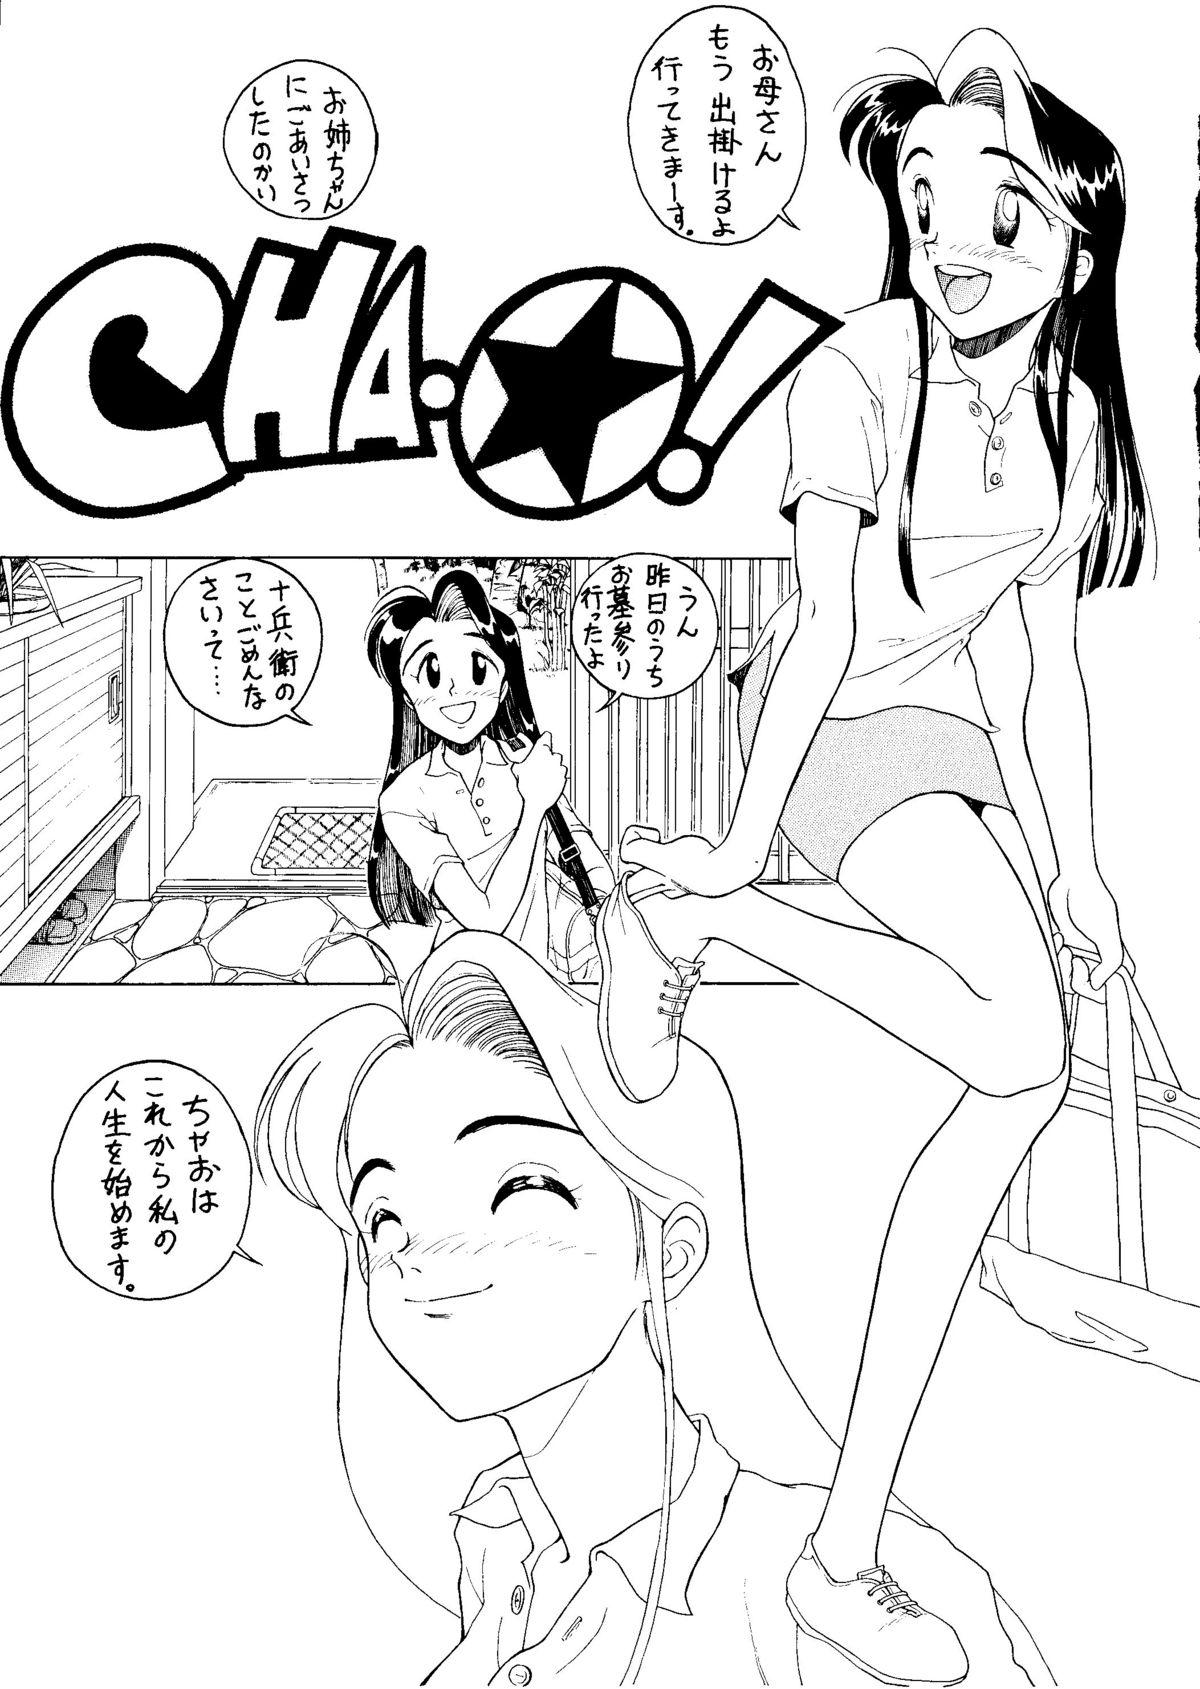 Pantyhose NONTA Chao! Uptown Boys Amature Sex - Page 4